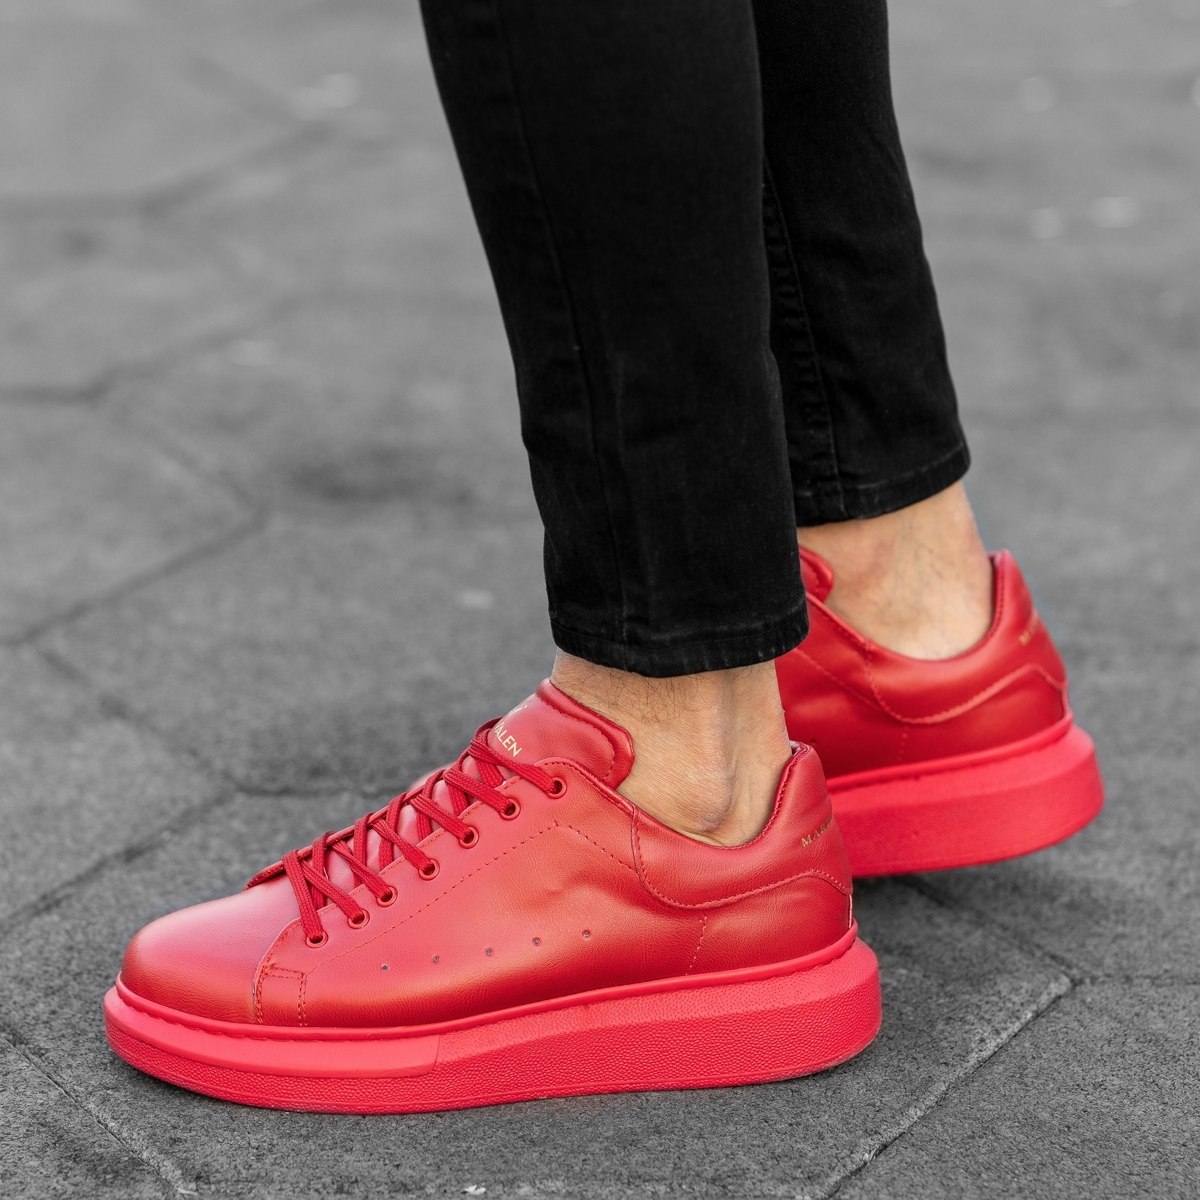 Hype Sole Sneakers In Full Red | Martin Valen